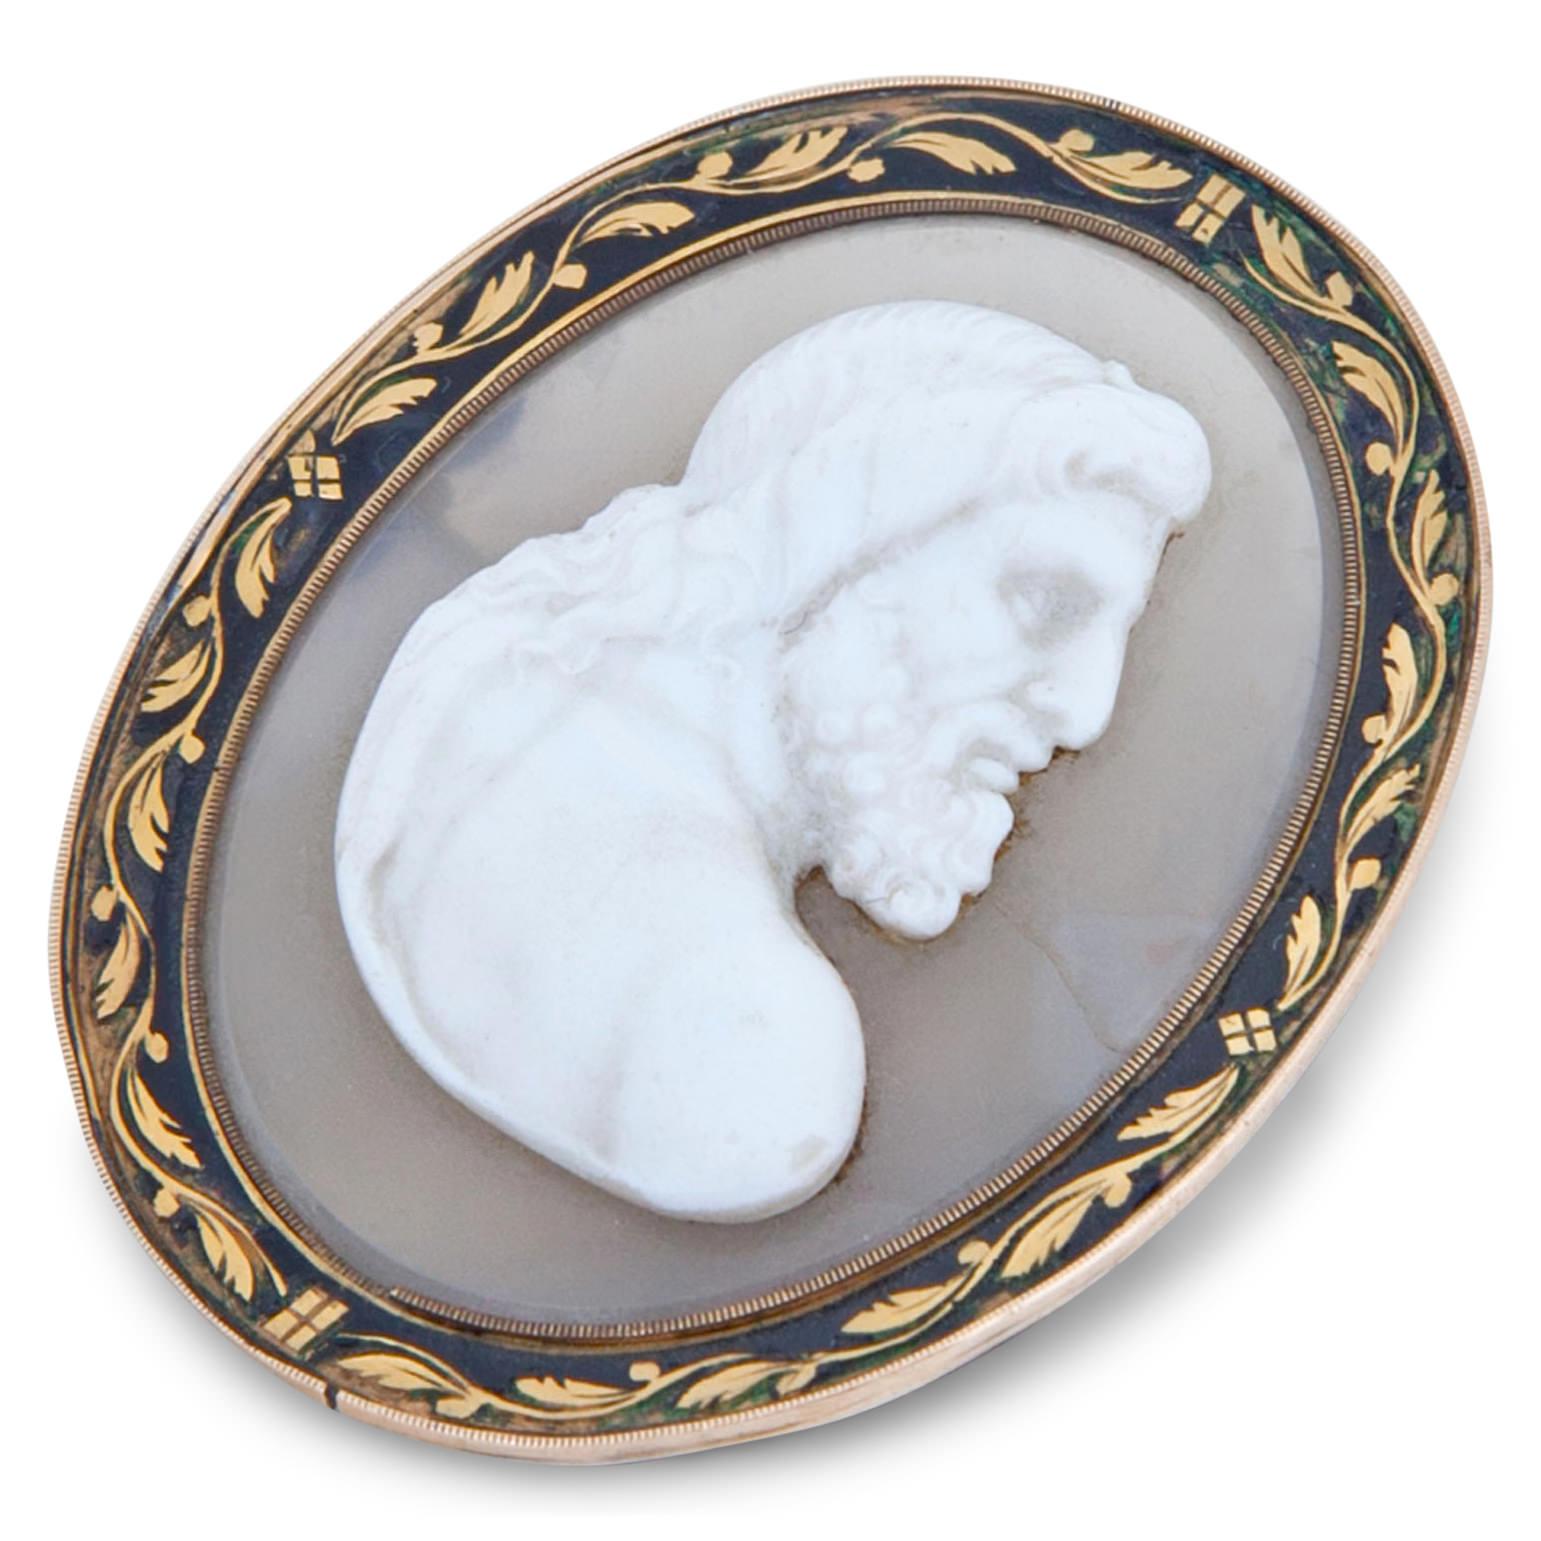 Small oval cameo broche in a gold frame out of Agate.